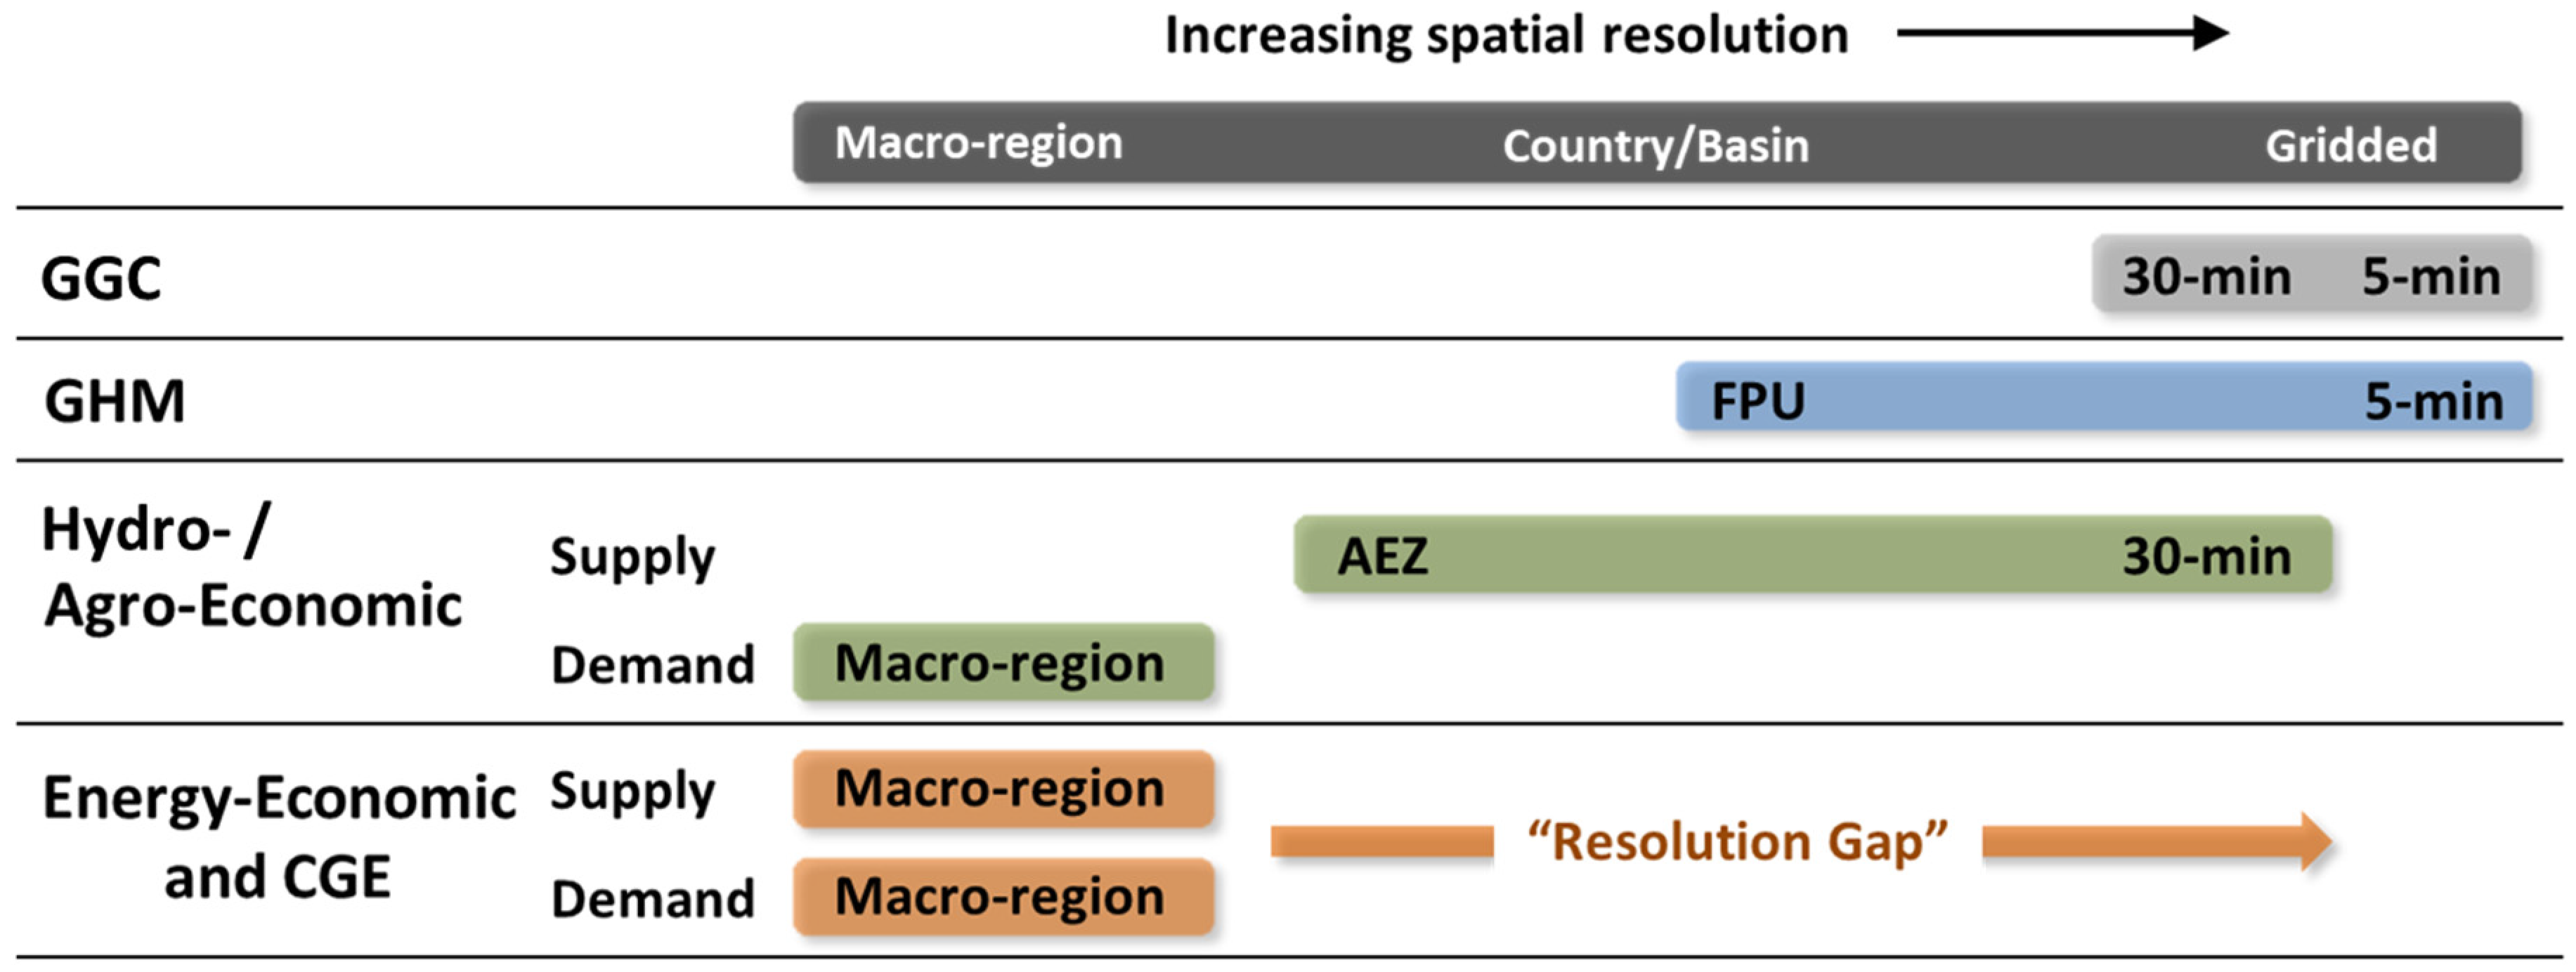 State capitals, Federal District, and macro-regions of Brazil. The